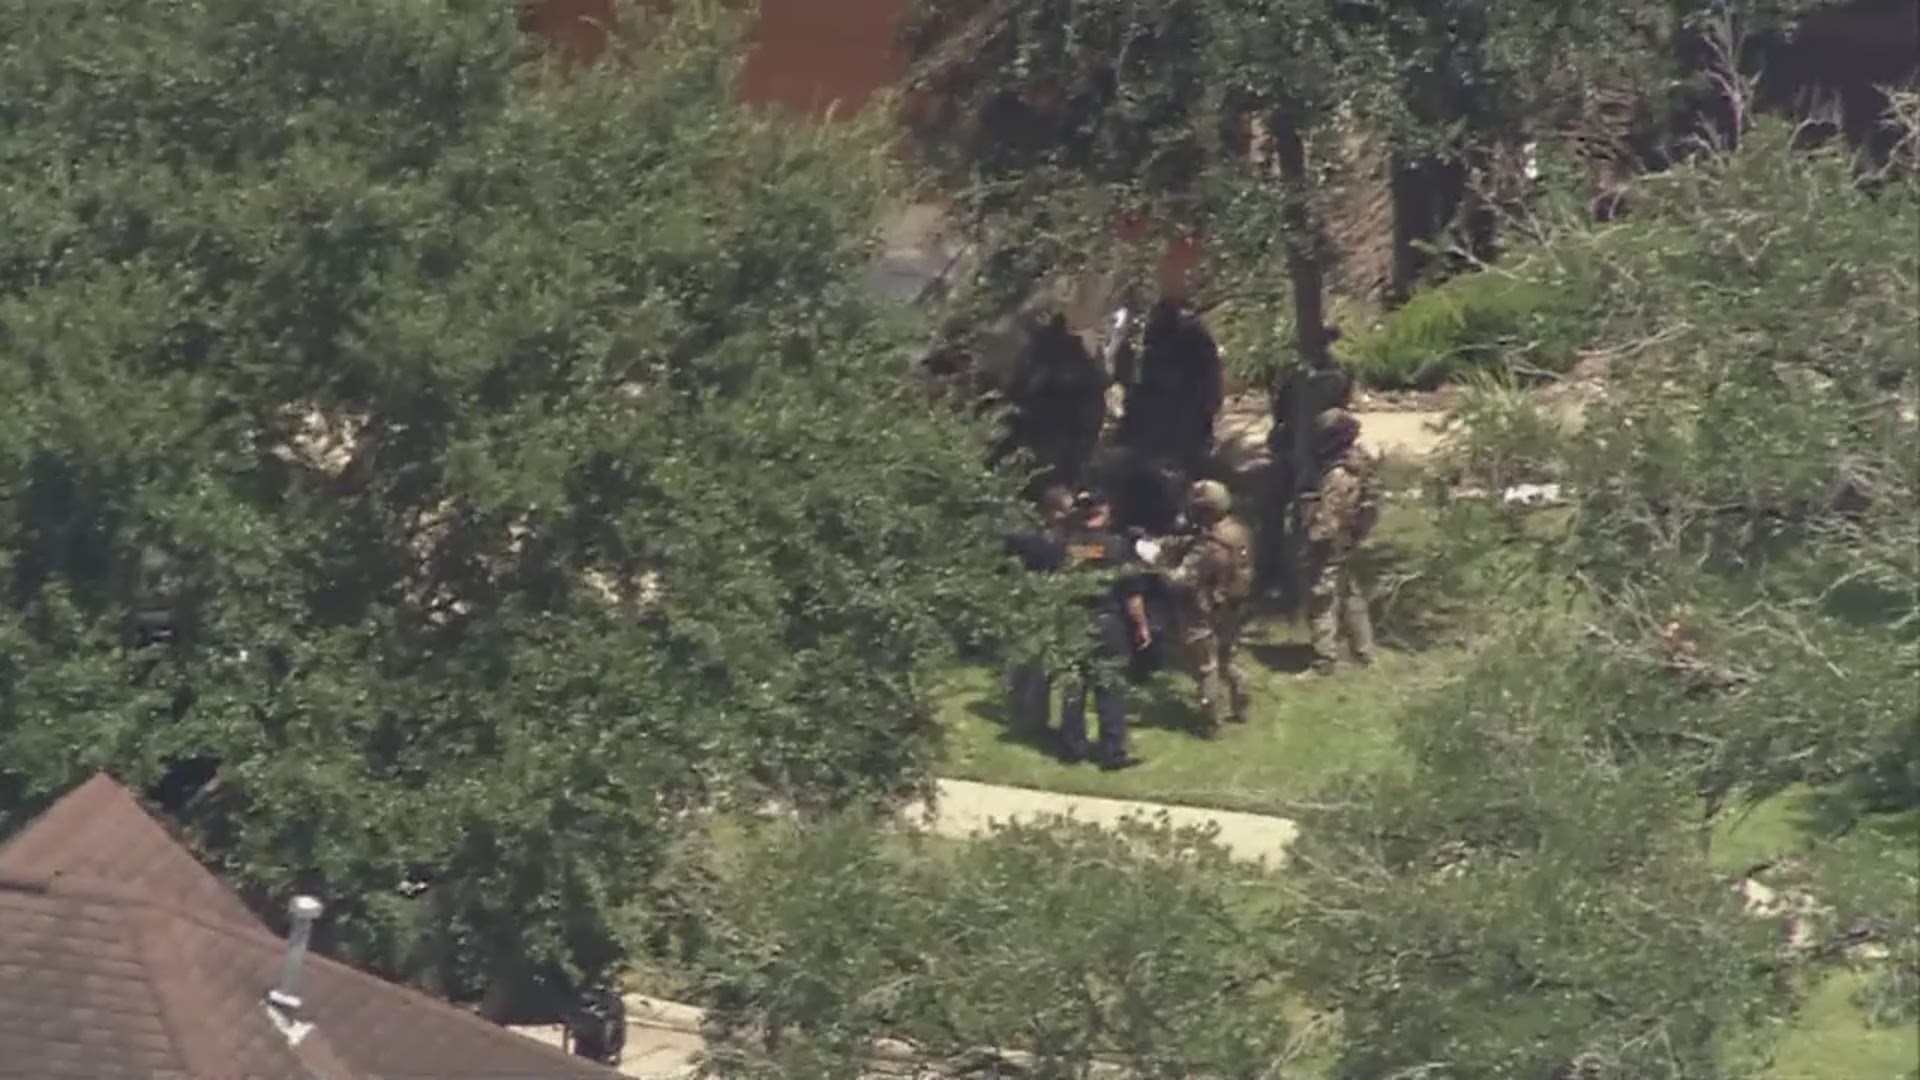 An armed suspect was taken into custody following an almost four hour standoff with police in a Bellaire neighborhood near the West Loop Friday morning.